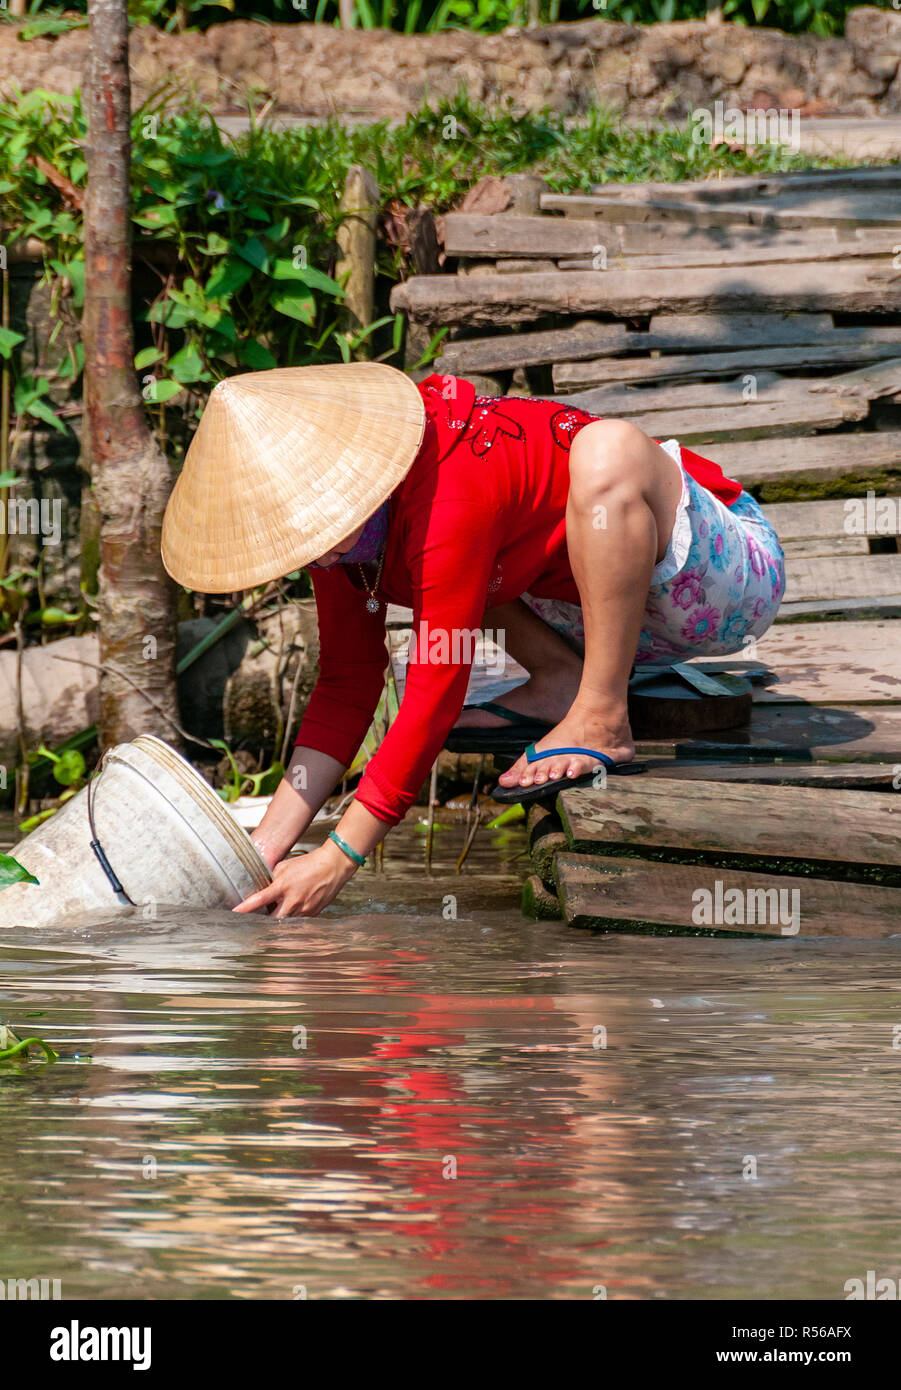 Young woman wearing bright red top crouching by the water's edge to wash out a bucket in river at Can Tho Province, Vietnam Stock Photo